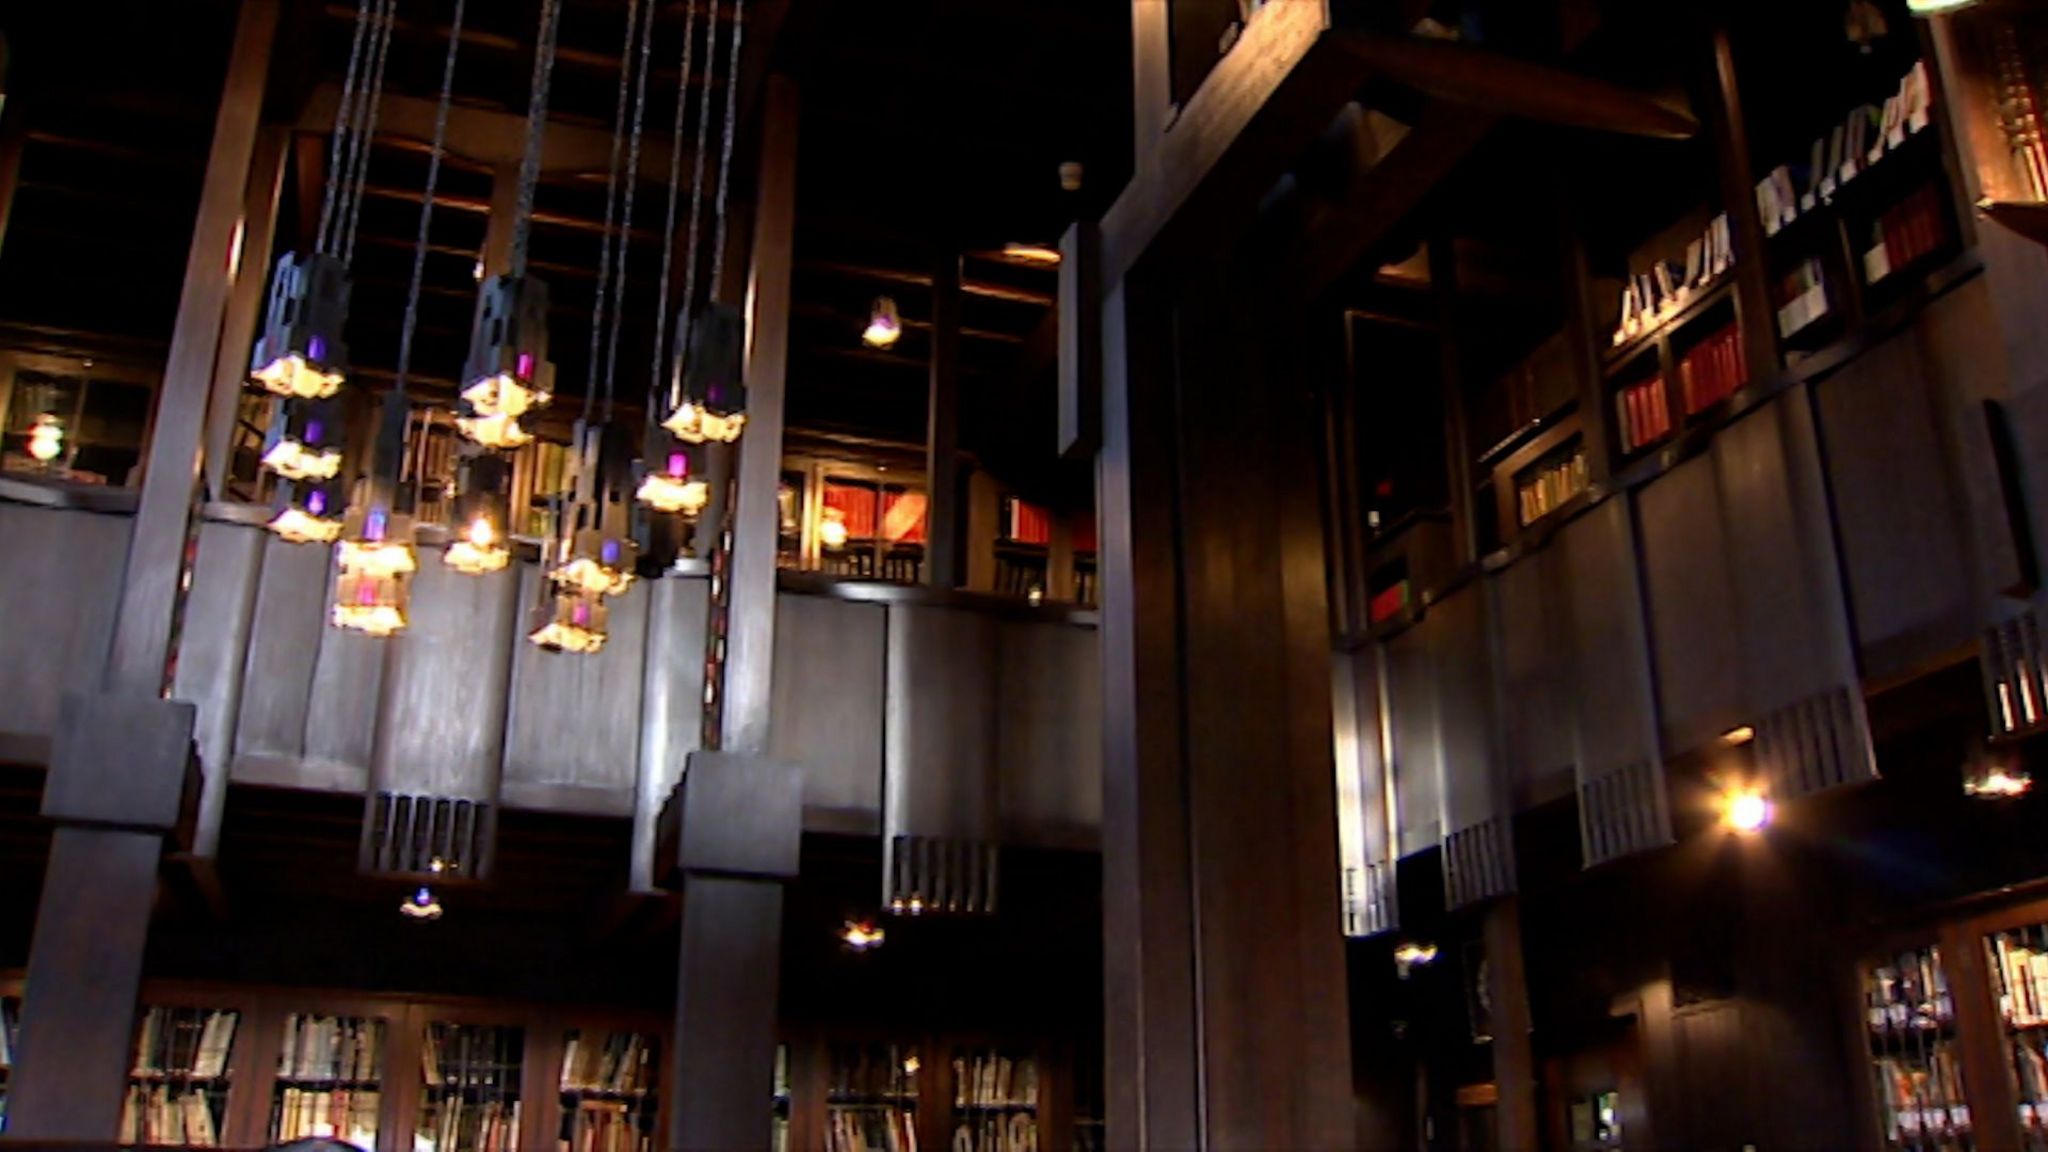 Library designed by Charles Rennie Mackintosh at the Glasgow School of Art